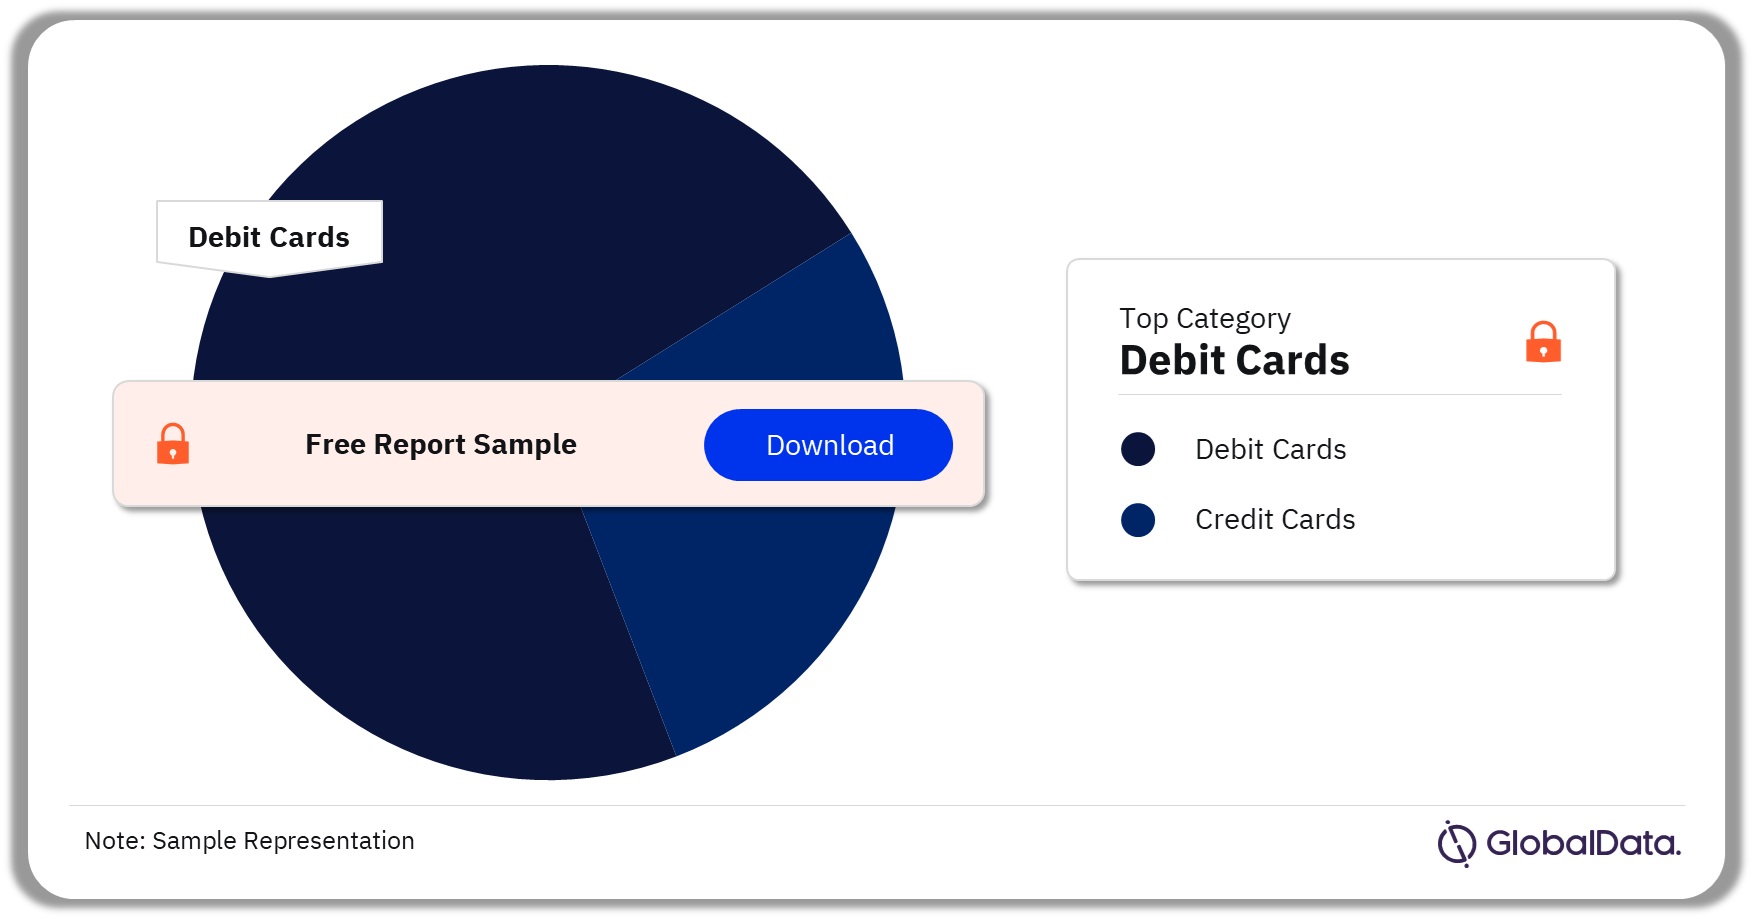 Payment Card Market Analysis by Segments, 2023 (%)